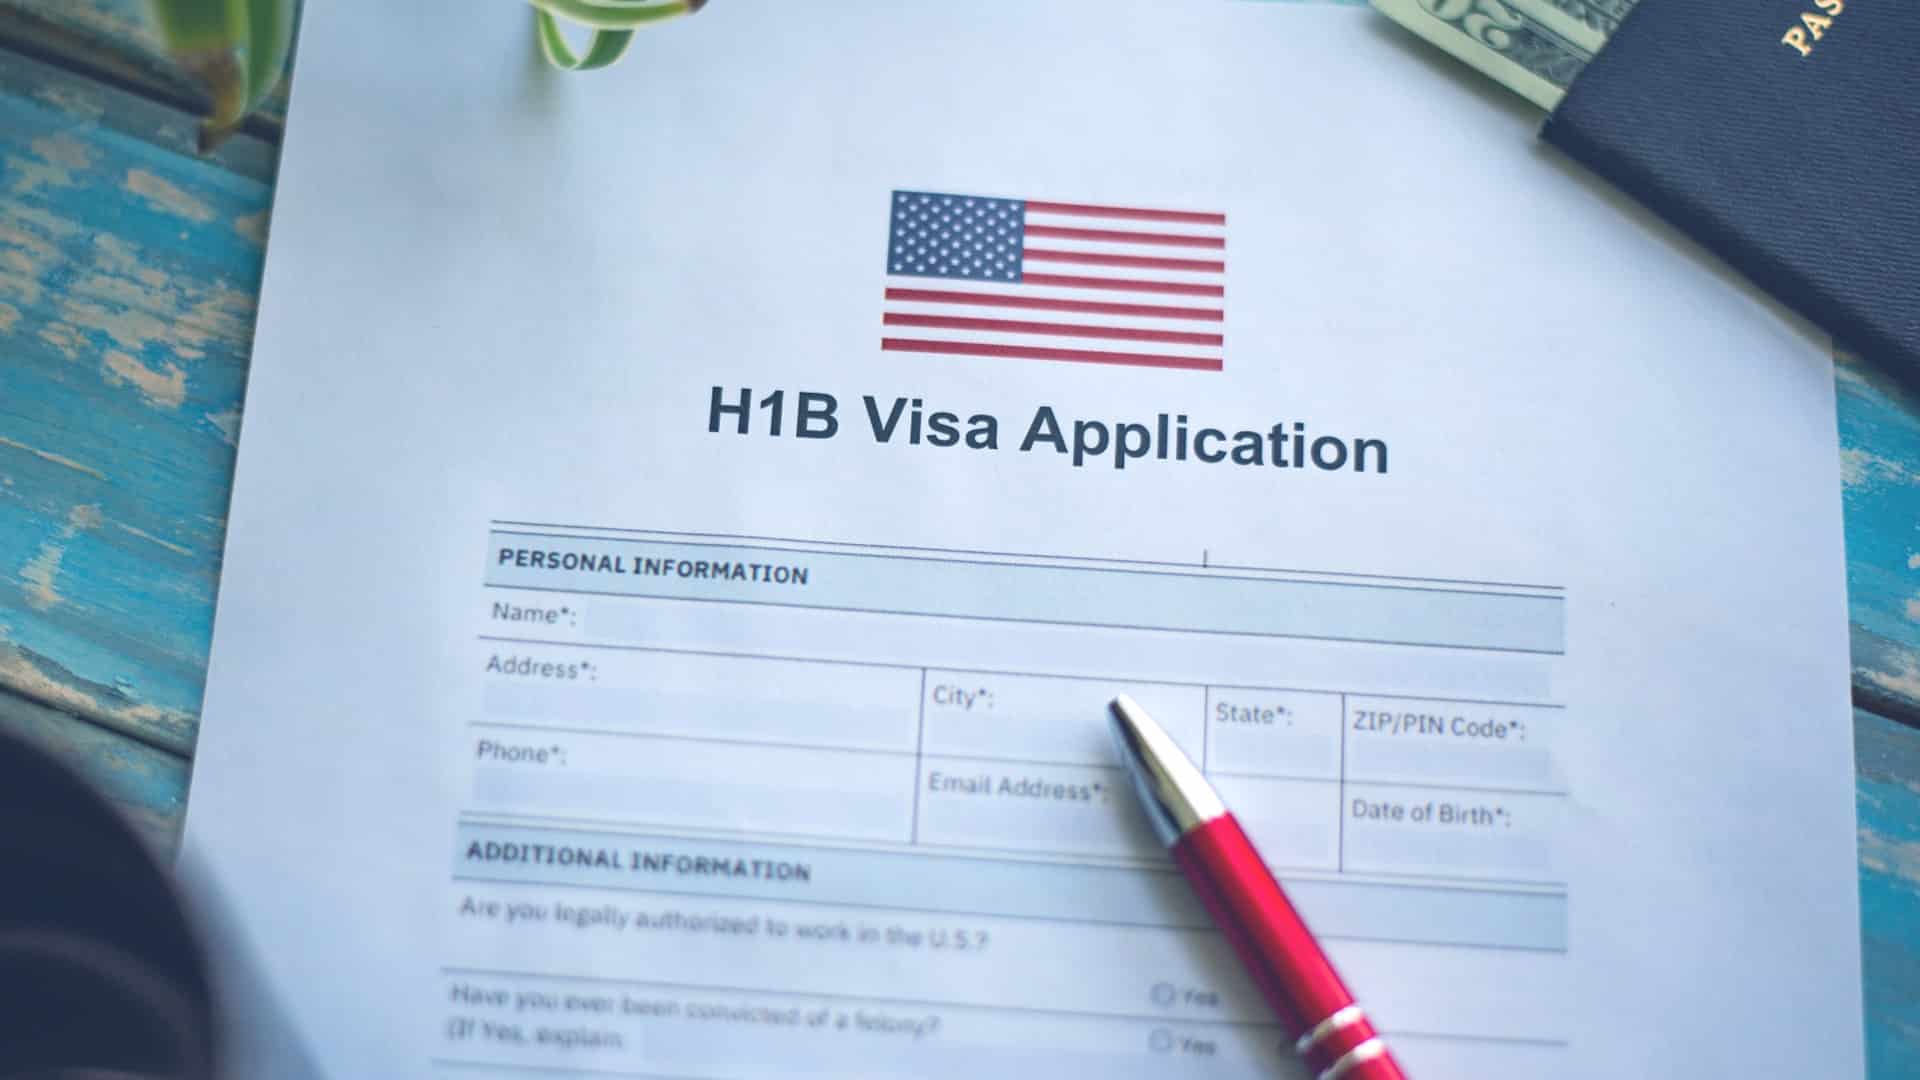 Biden administration proposes massive hike in immigration fees including H-1B visas